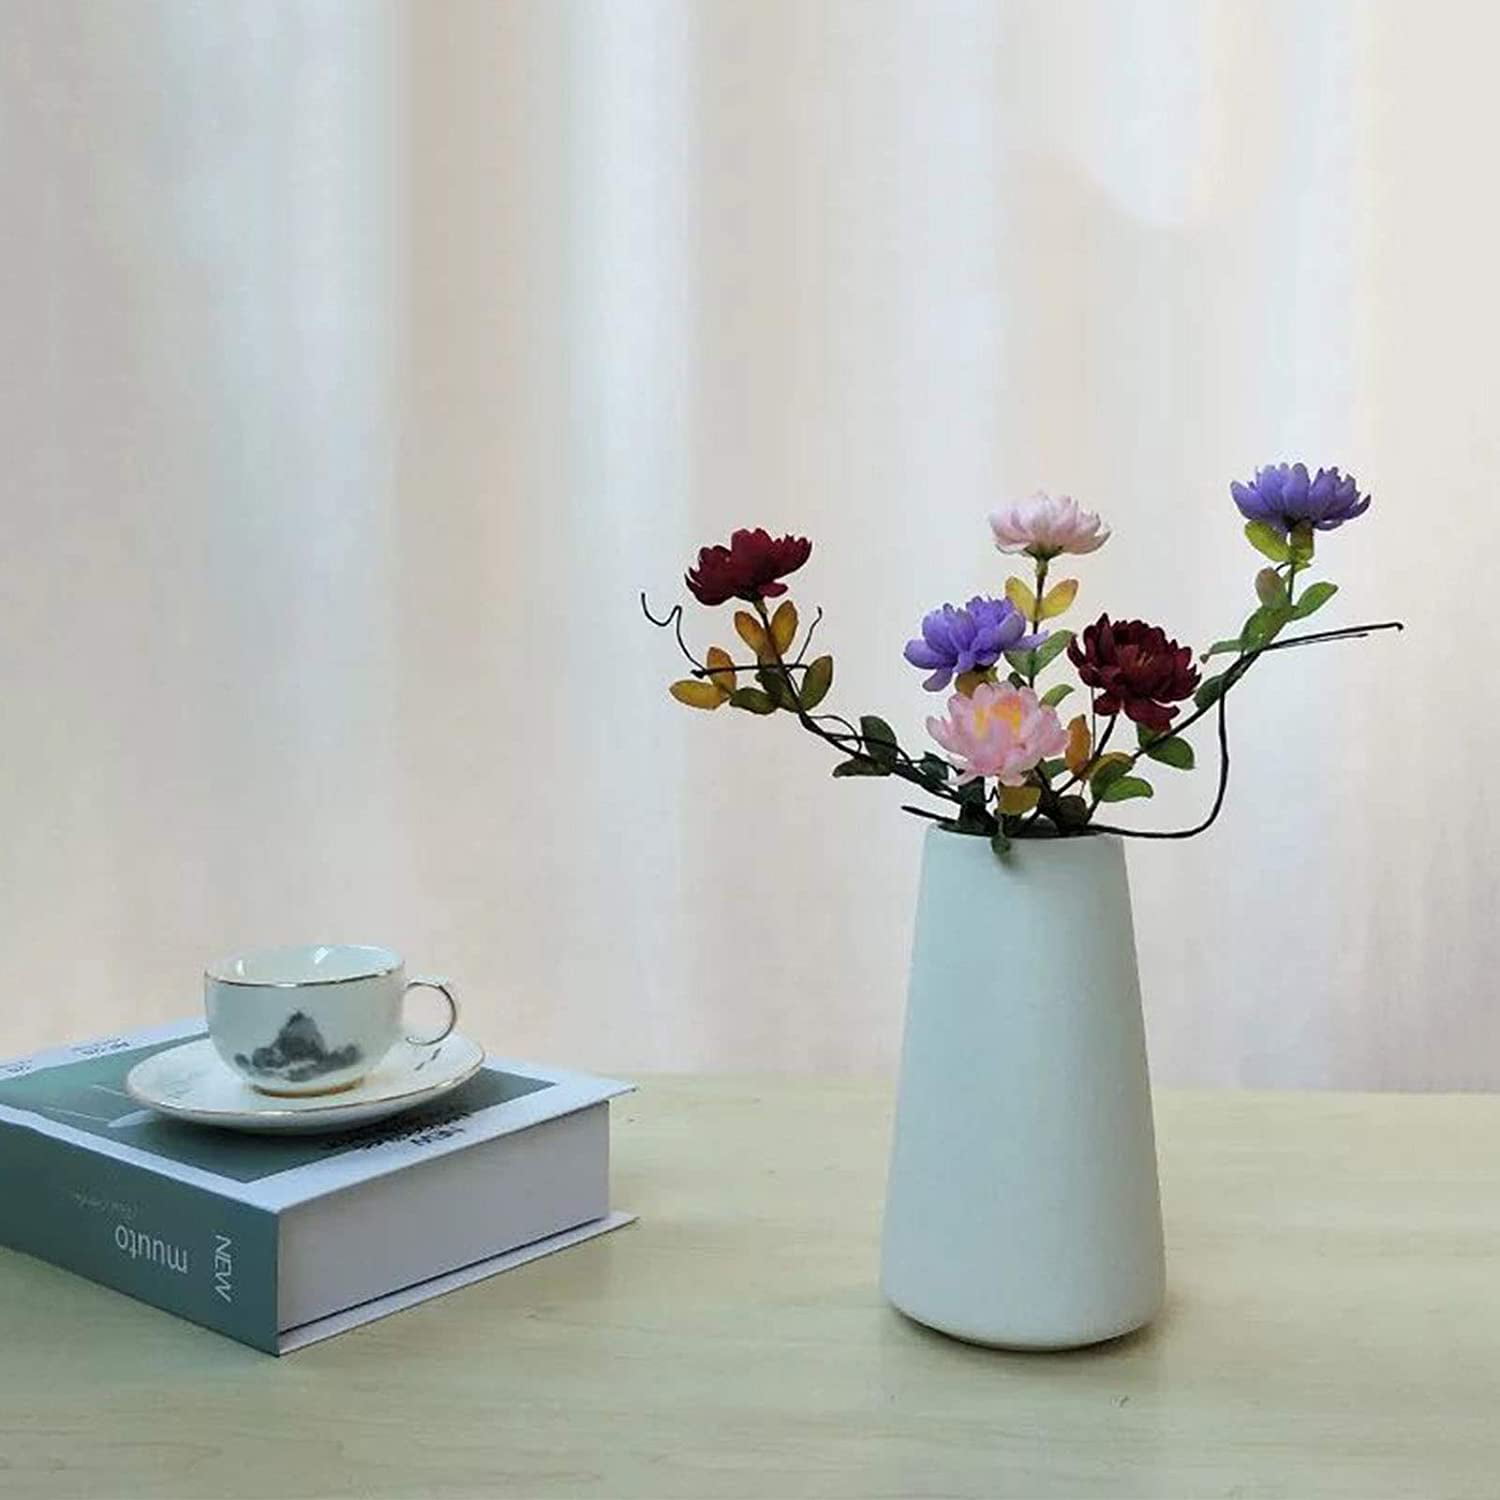 Home Table Living Room Minimalist Flower Vase Decoration Hydroponic Modern Style 